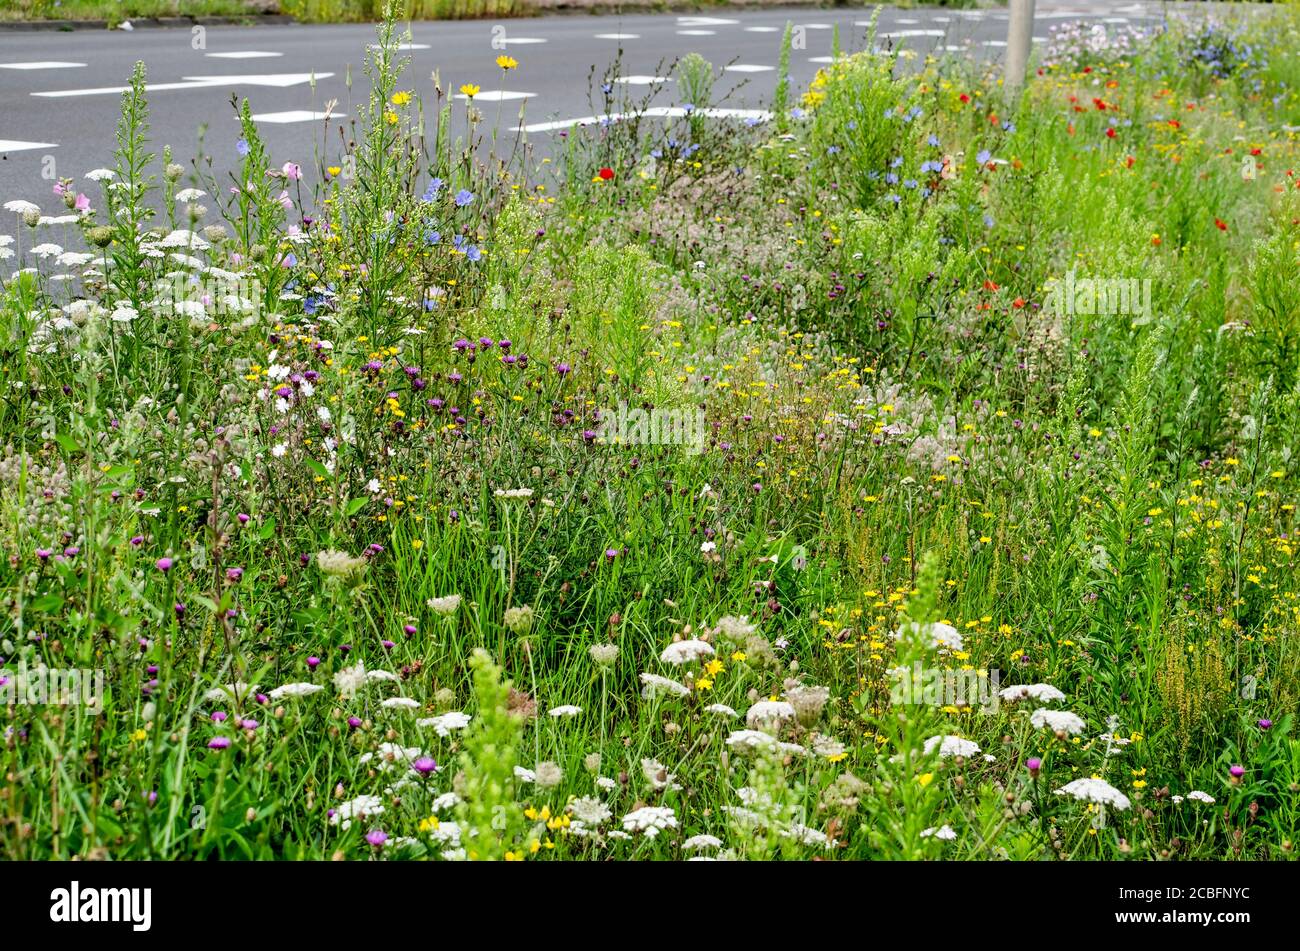 Tall grass and wildflowers in various colors grow plentyful by the side of a main traffic road  in summer in the town of Zwolle, The Netherlands Stock Photo